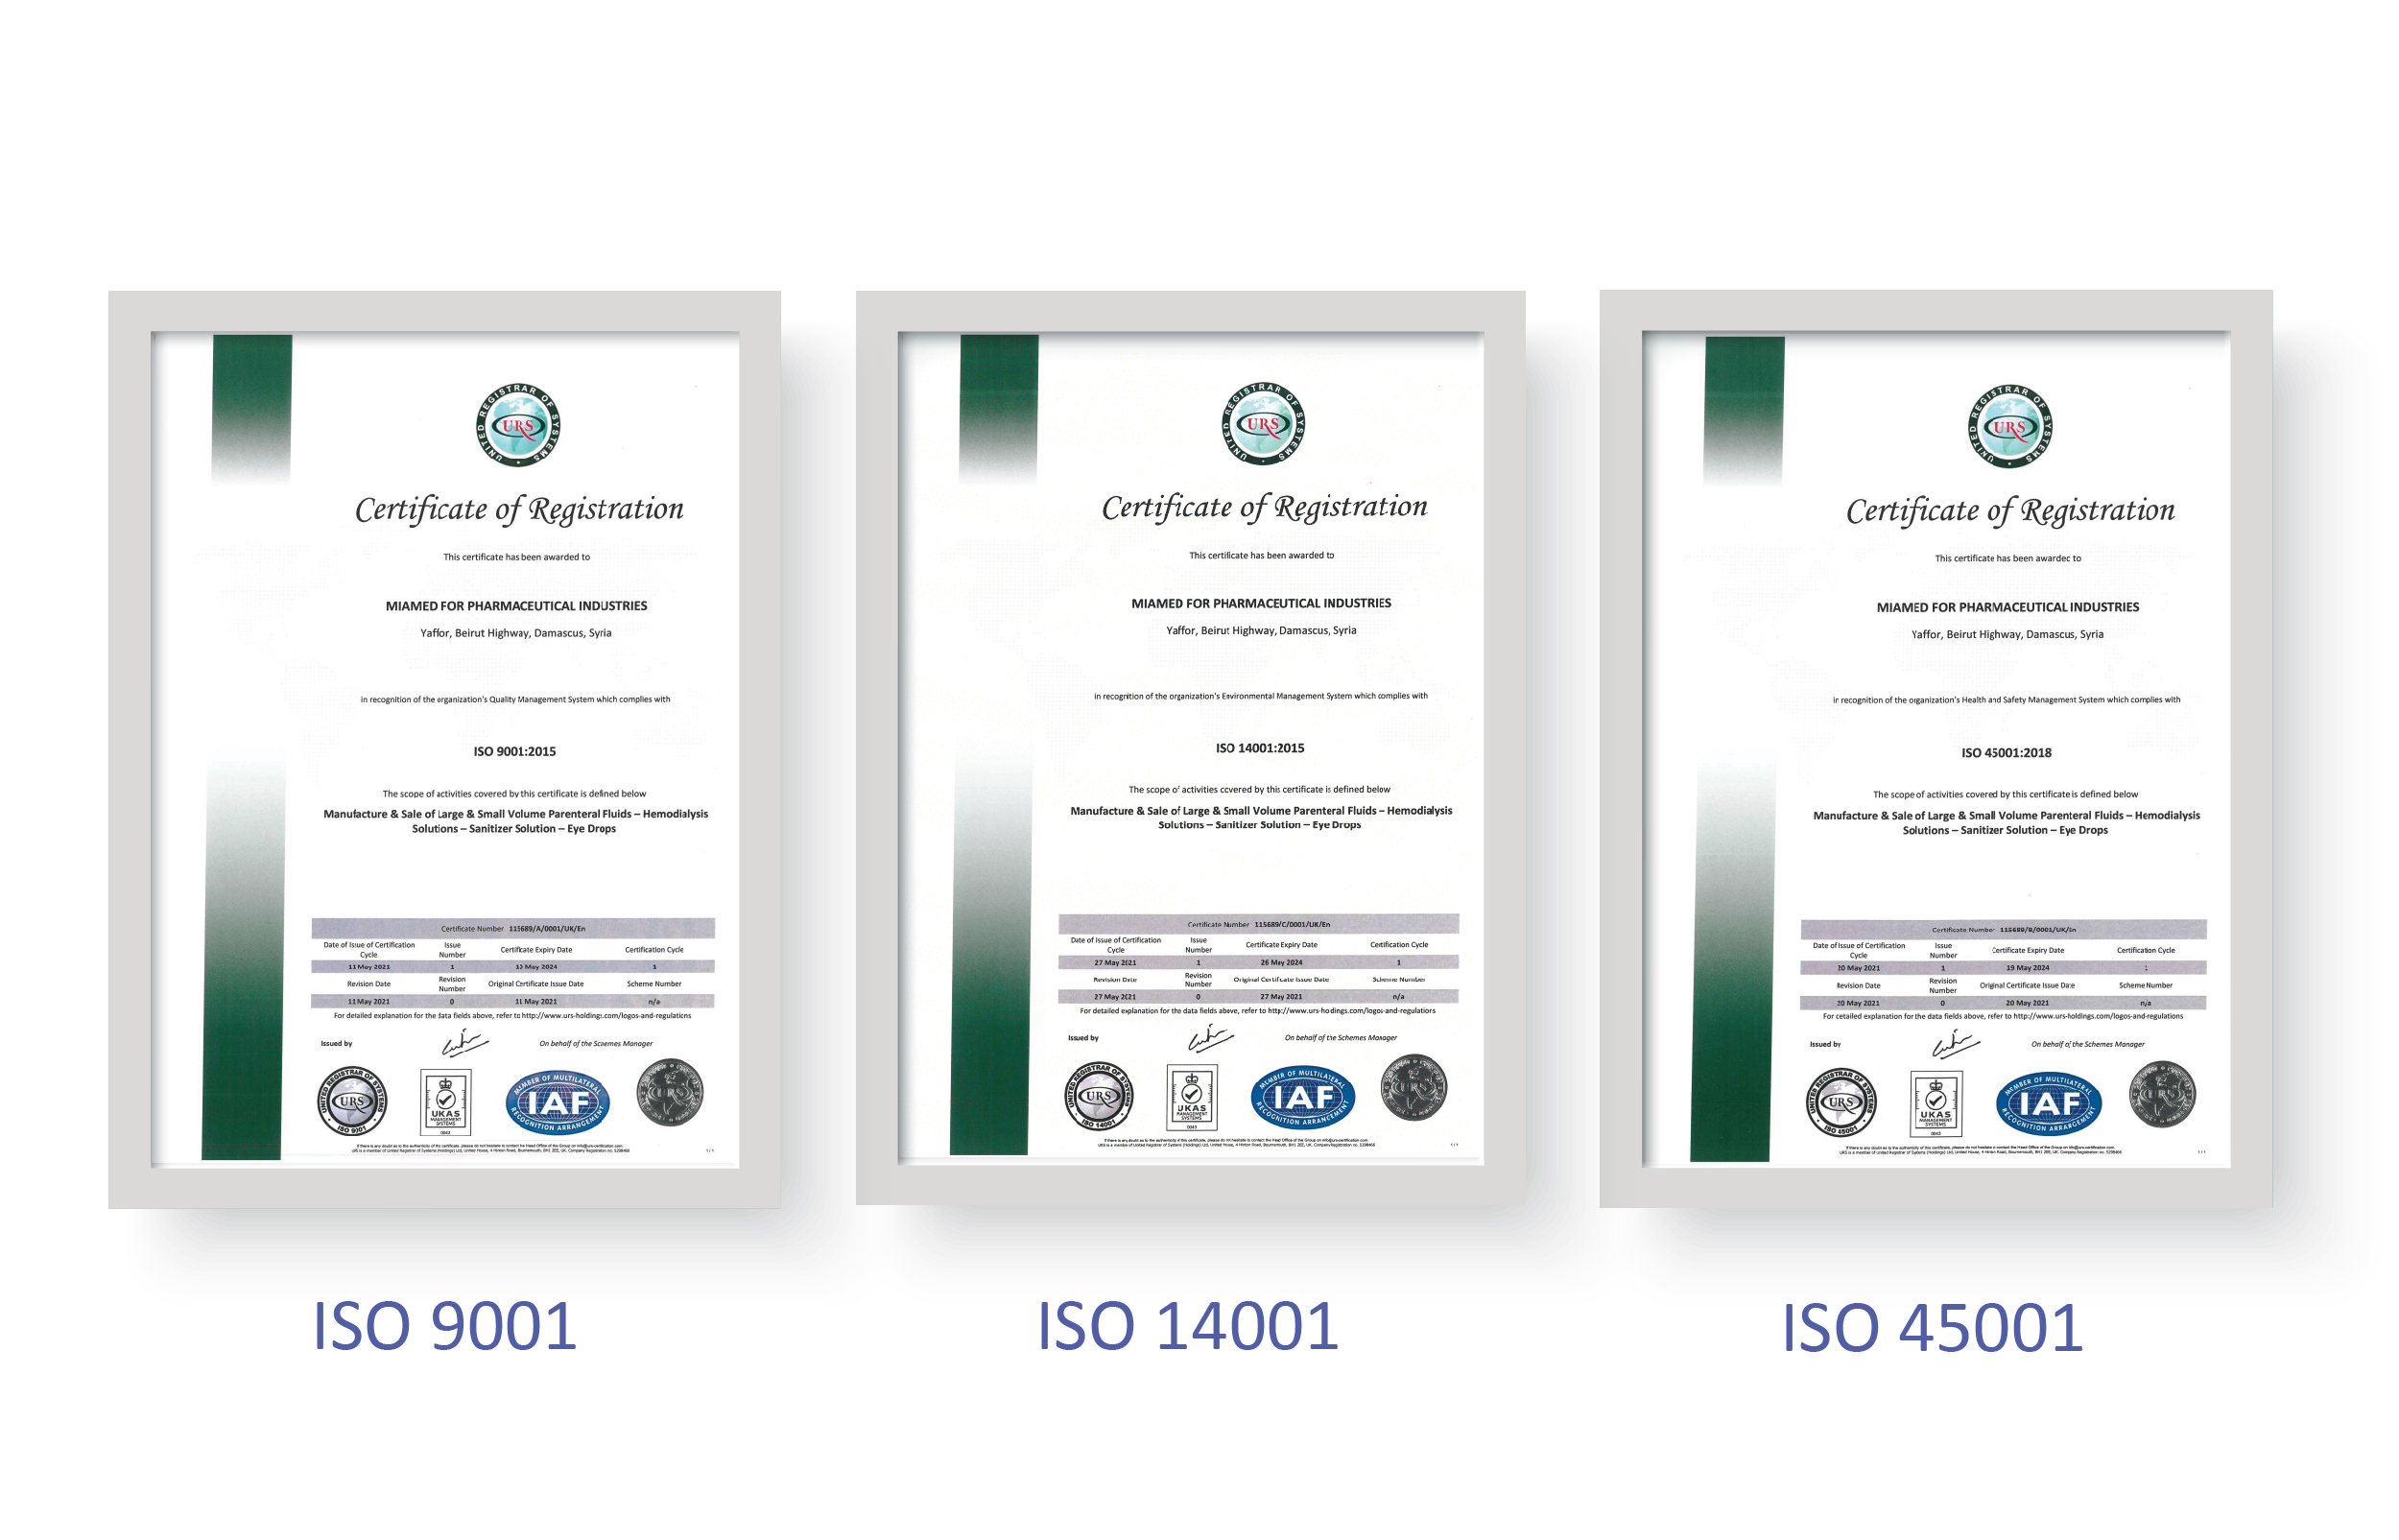 Miamed gets three ISO certifications